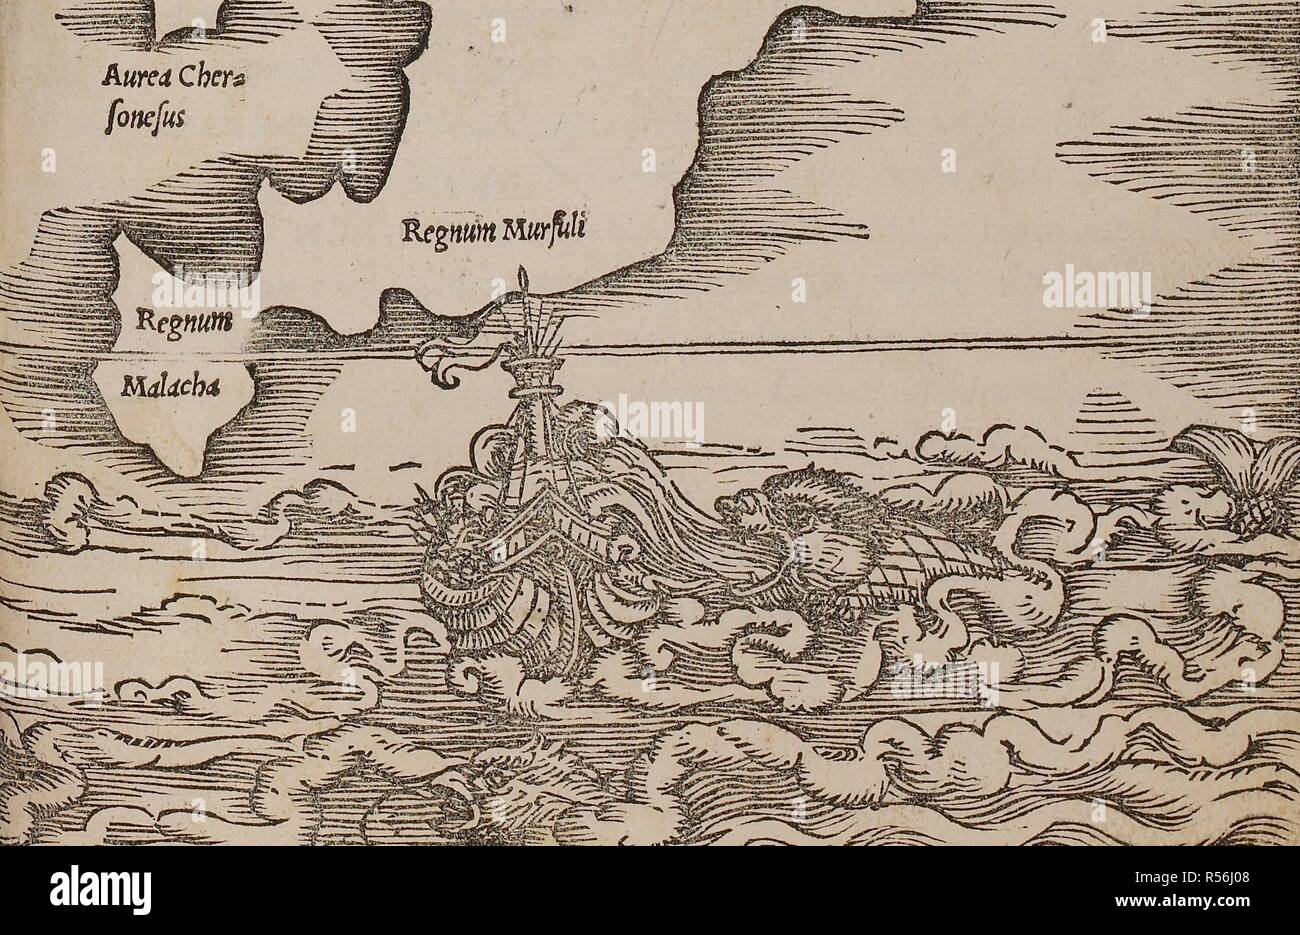 A sea monster known as a physetera or spouter, a type of whale, attacking a ship by vomiting water on it. C. Julii Solini Polyhistor ... Huic Pomponii MelÃ¦ de situ orbis libros ... adiunximus. Accesserunt nova scholia, quÃ¦ loca autoris utriusï€œ; obscuriora ... illustrant, tabulÃ¦ geographicÃ¦, etc. BasileÃ¦ : Apud M. Isingrinium & H. Petri, 1538. Source: 216.b.1, between pages 150 and 151. Stock Photo